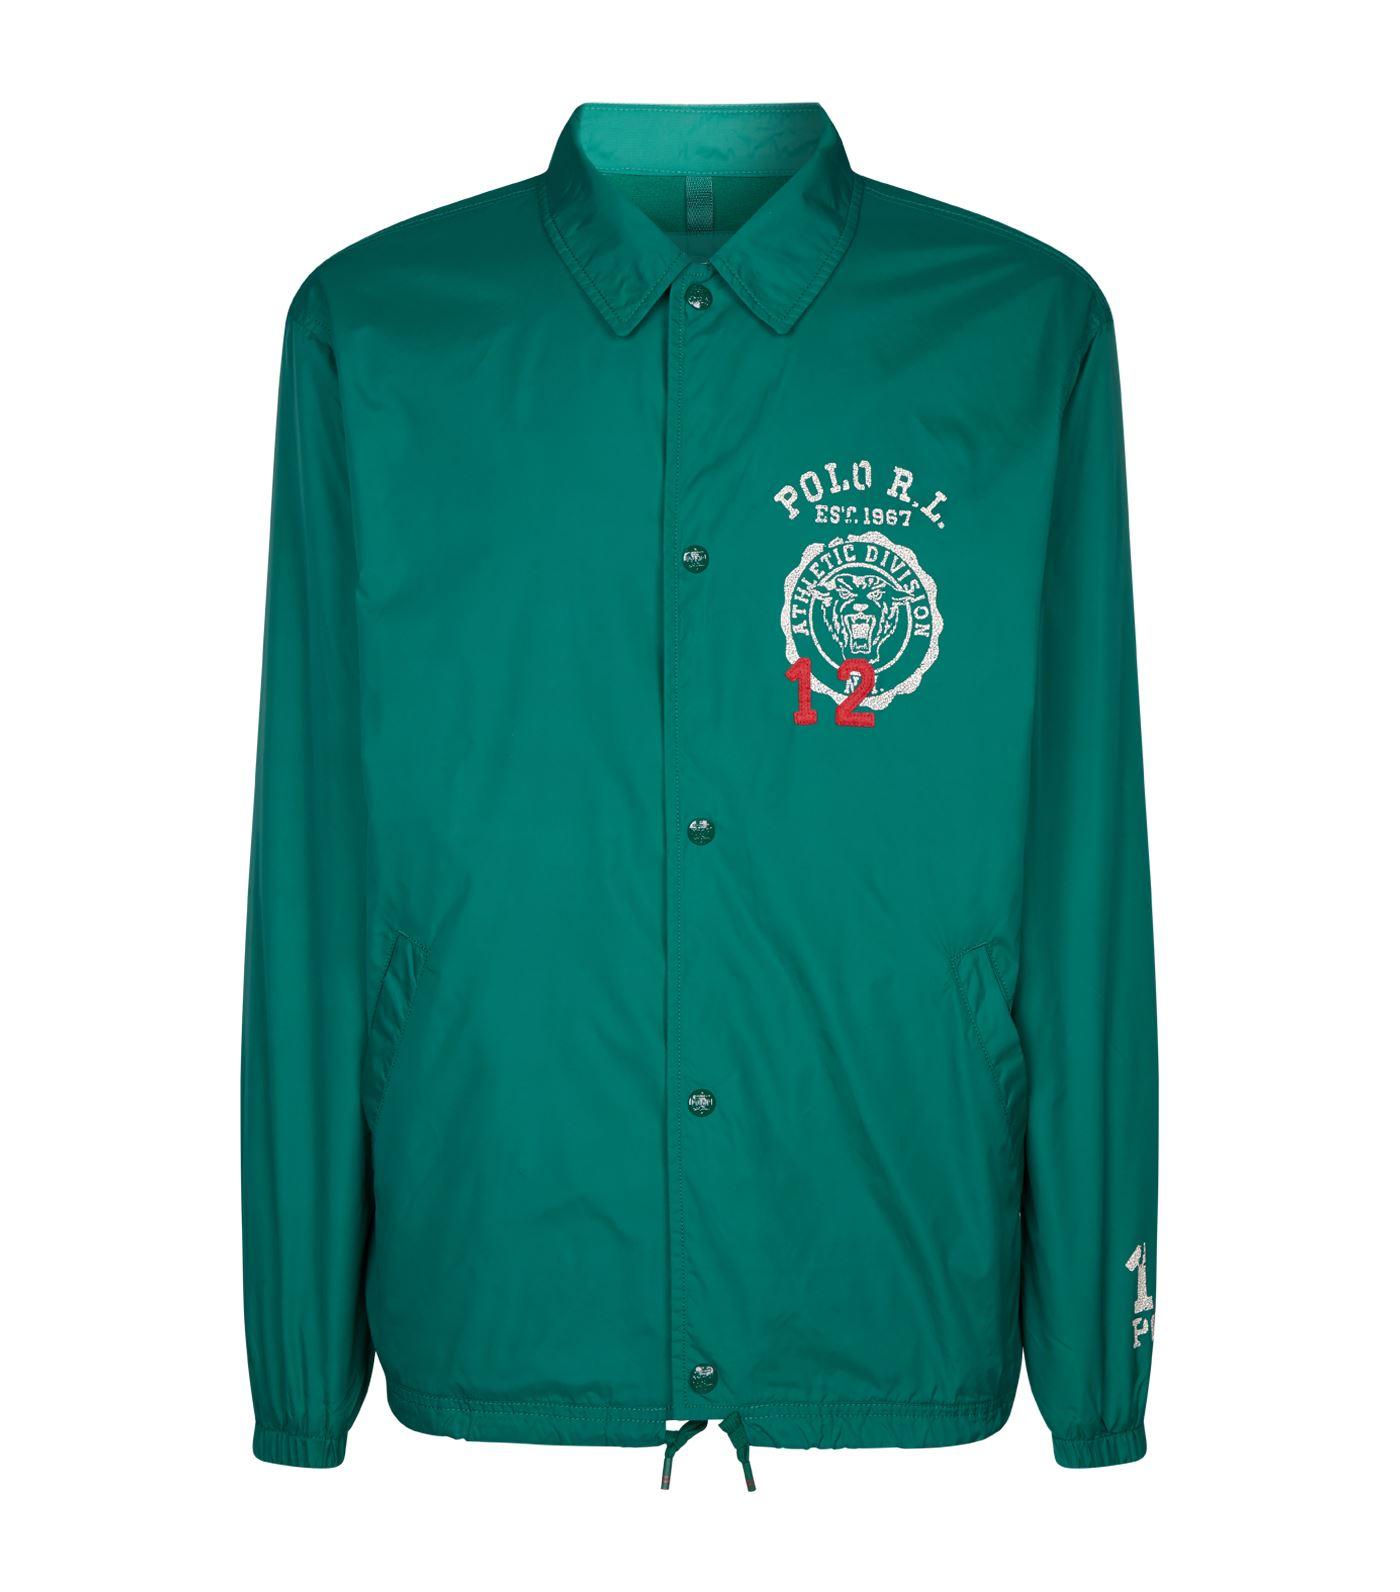 Polo Ralph Lauren Embroidered Coach Jacket in Green for Men - Lyst